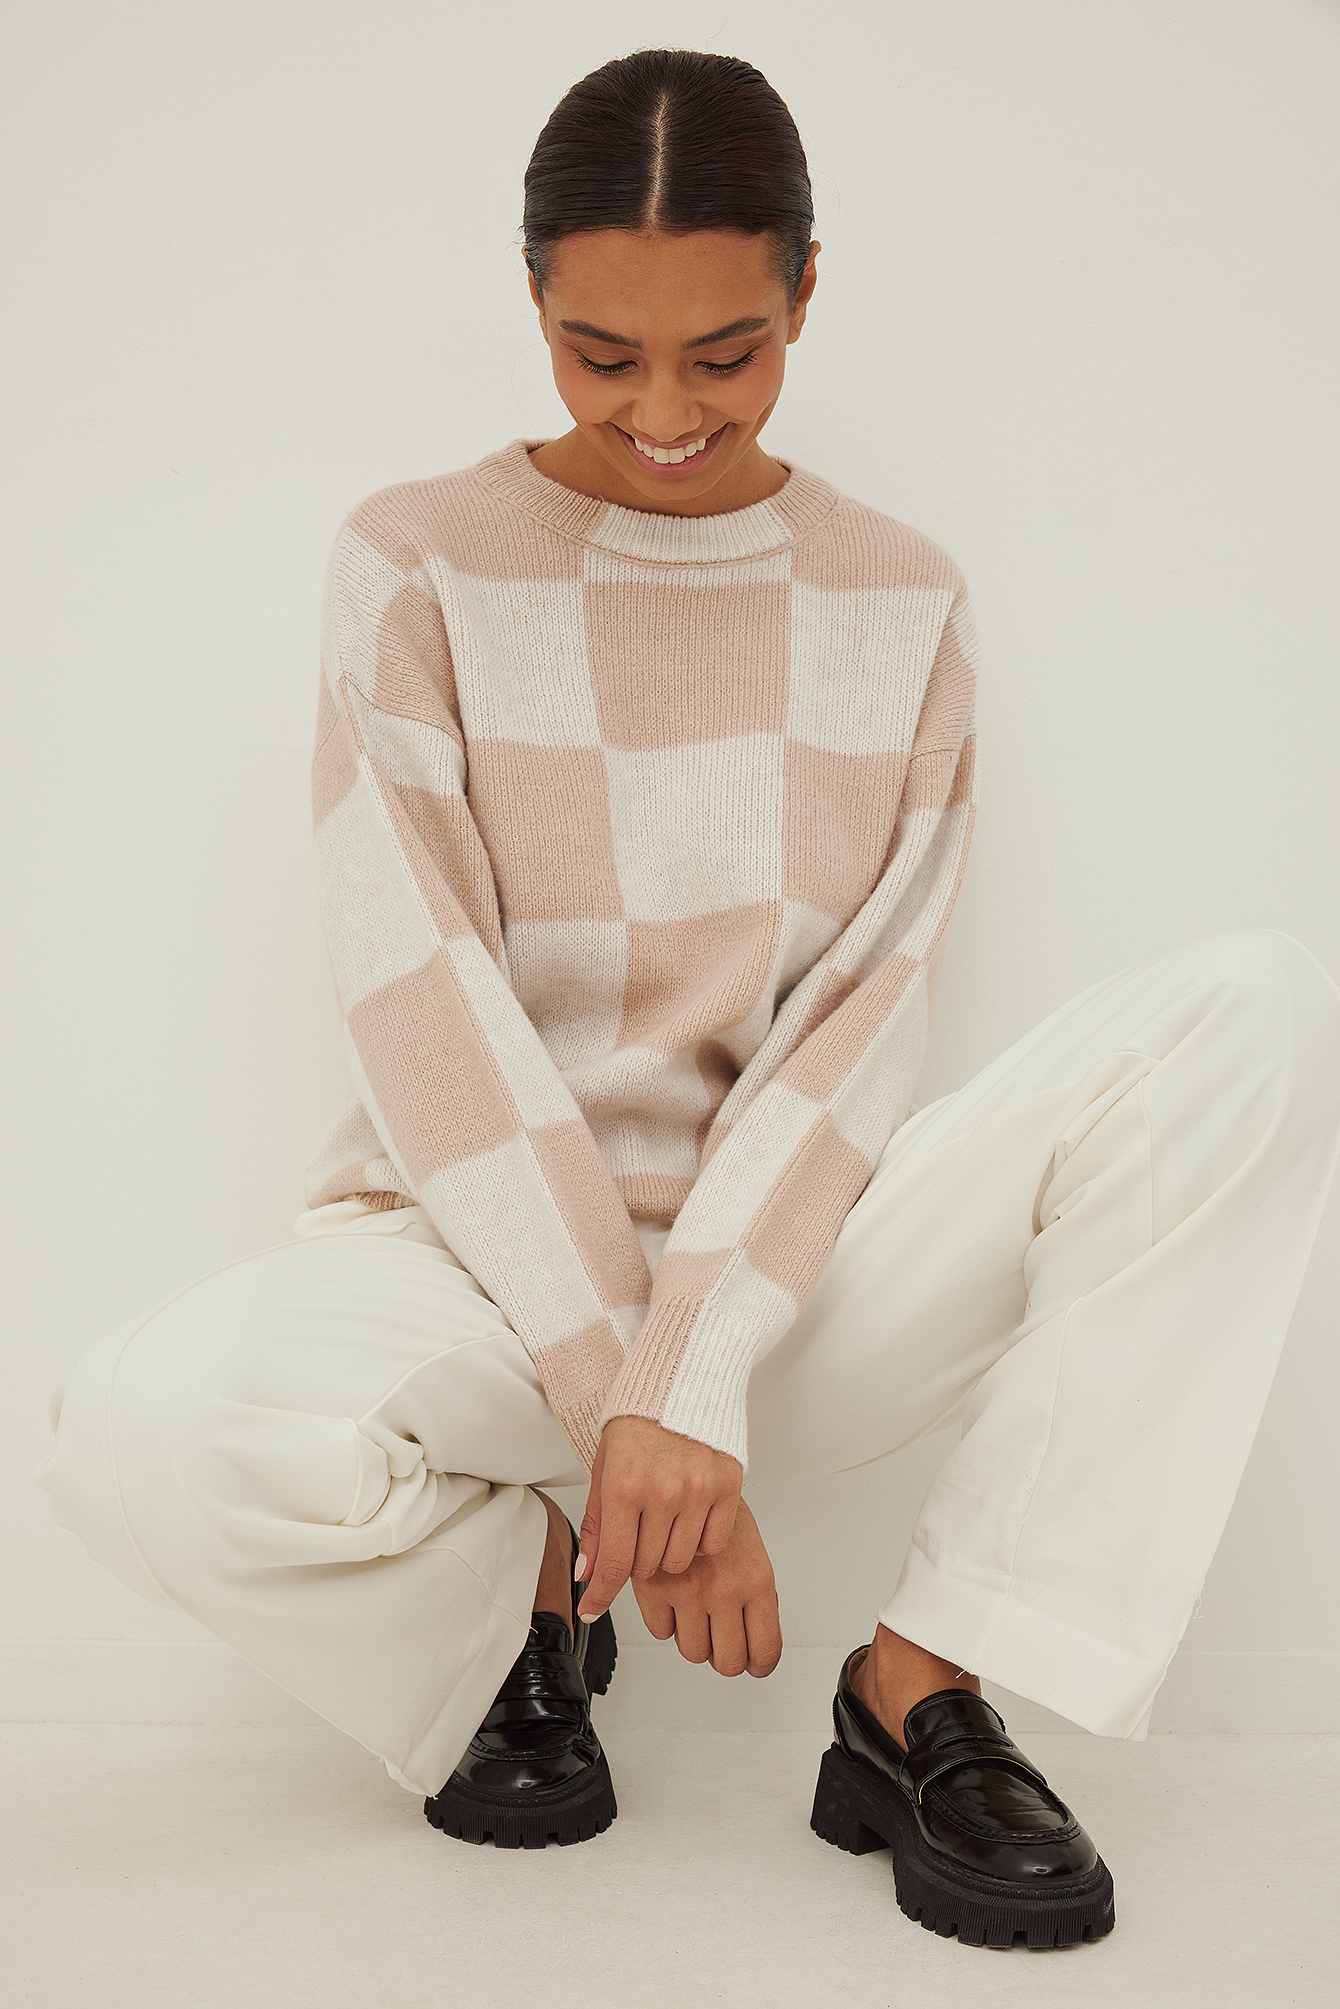 White/Beige Knitted Mock Neck Checkered Sweater